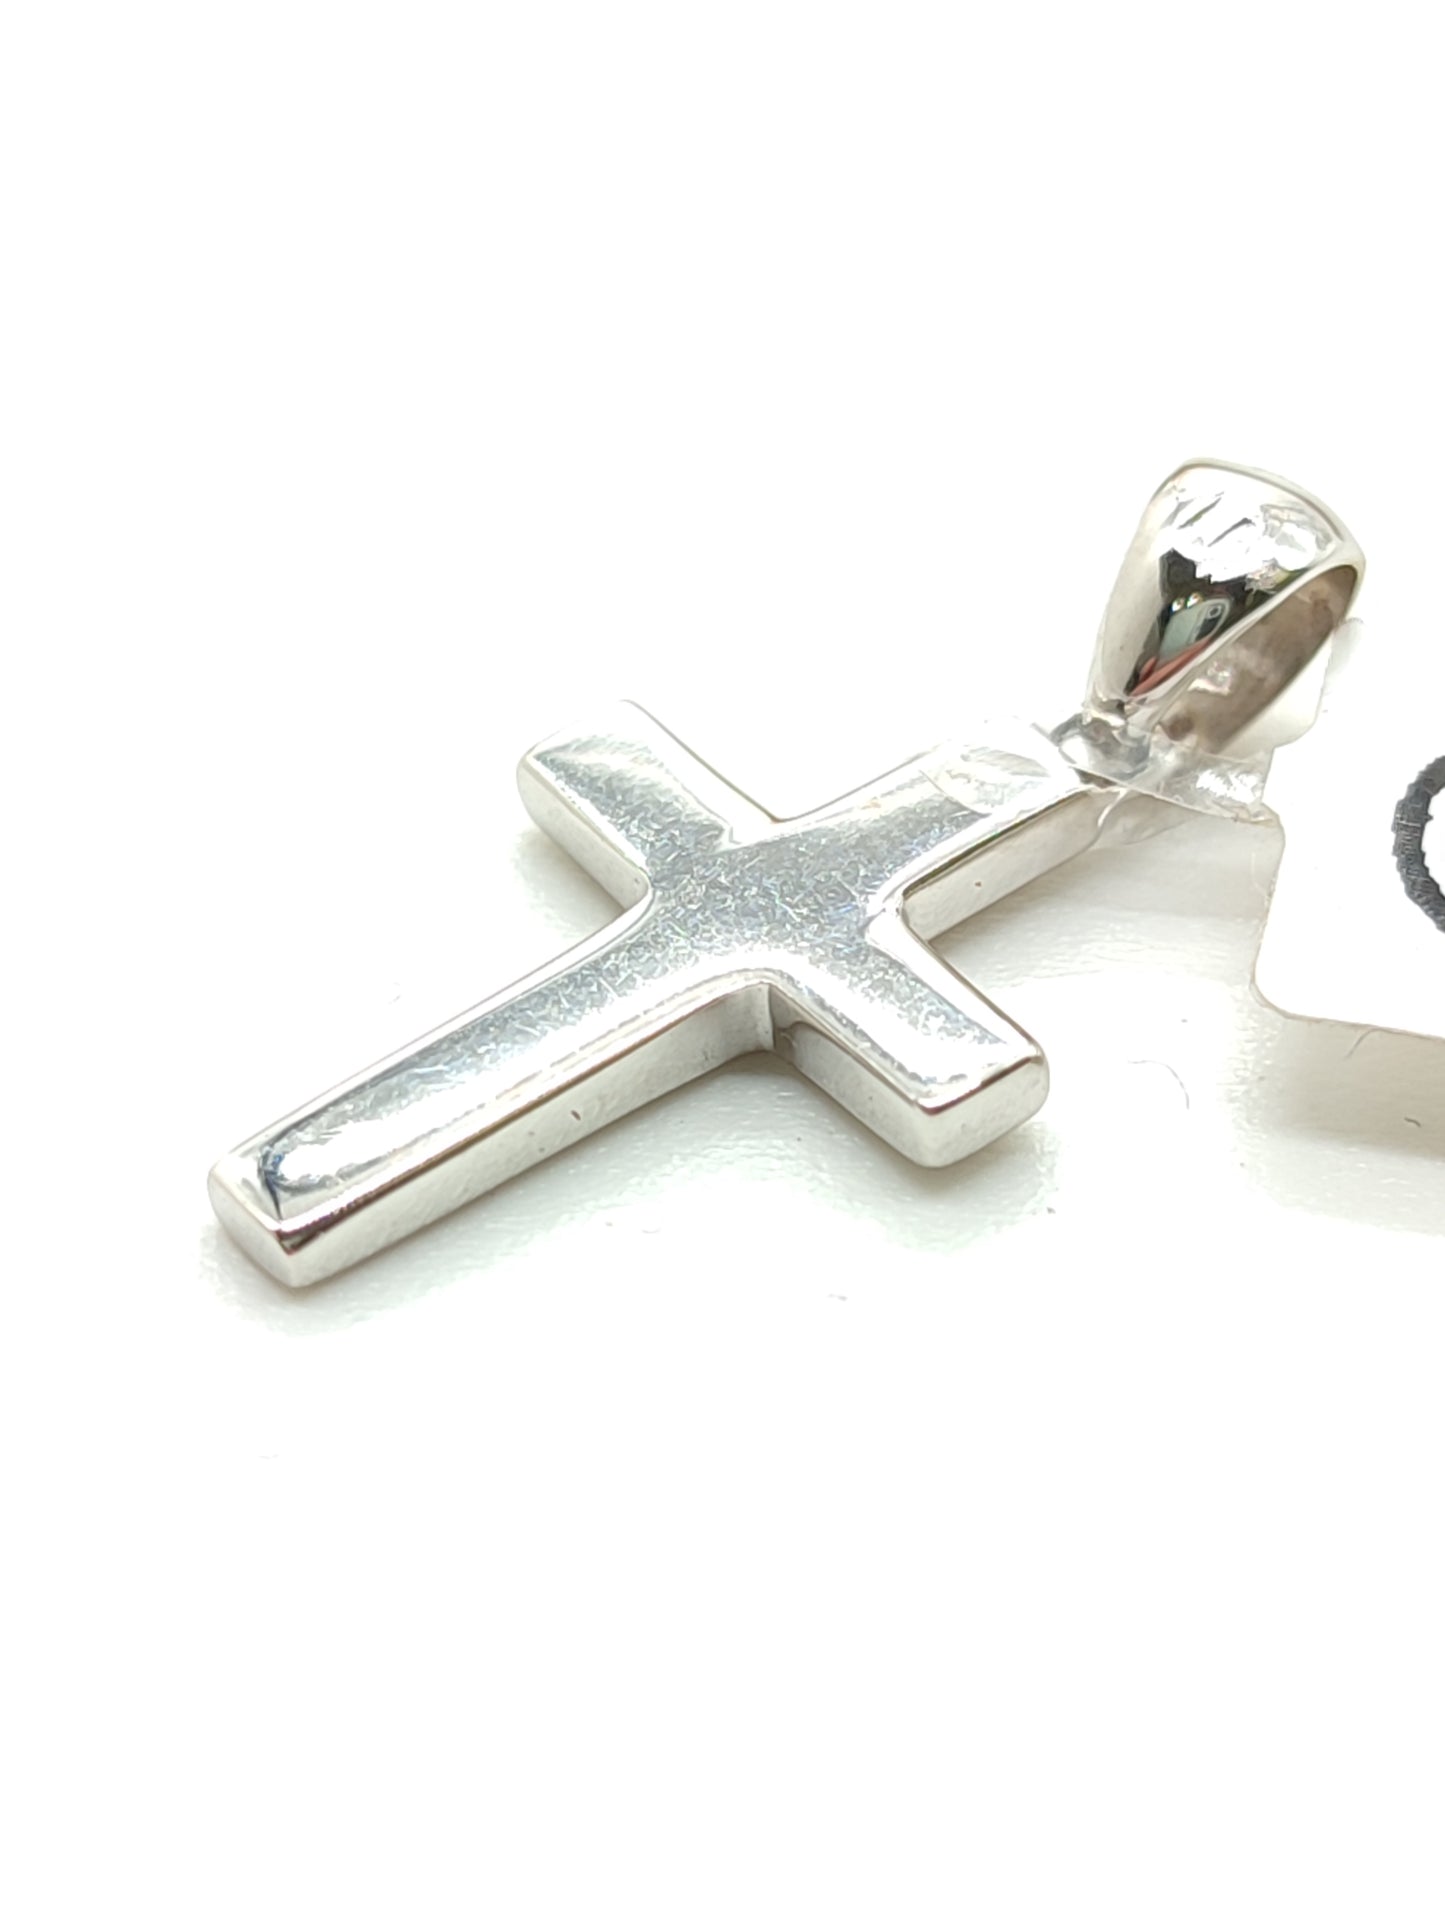 Solid cross pendant in white gold 2 x 1.5 cm